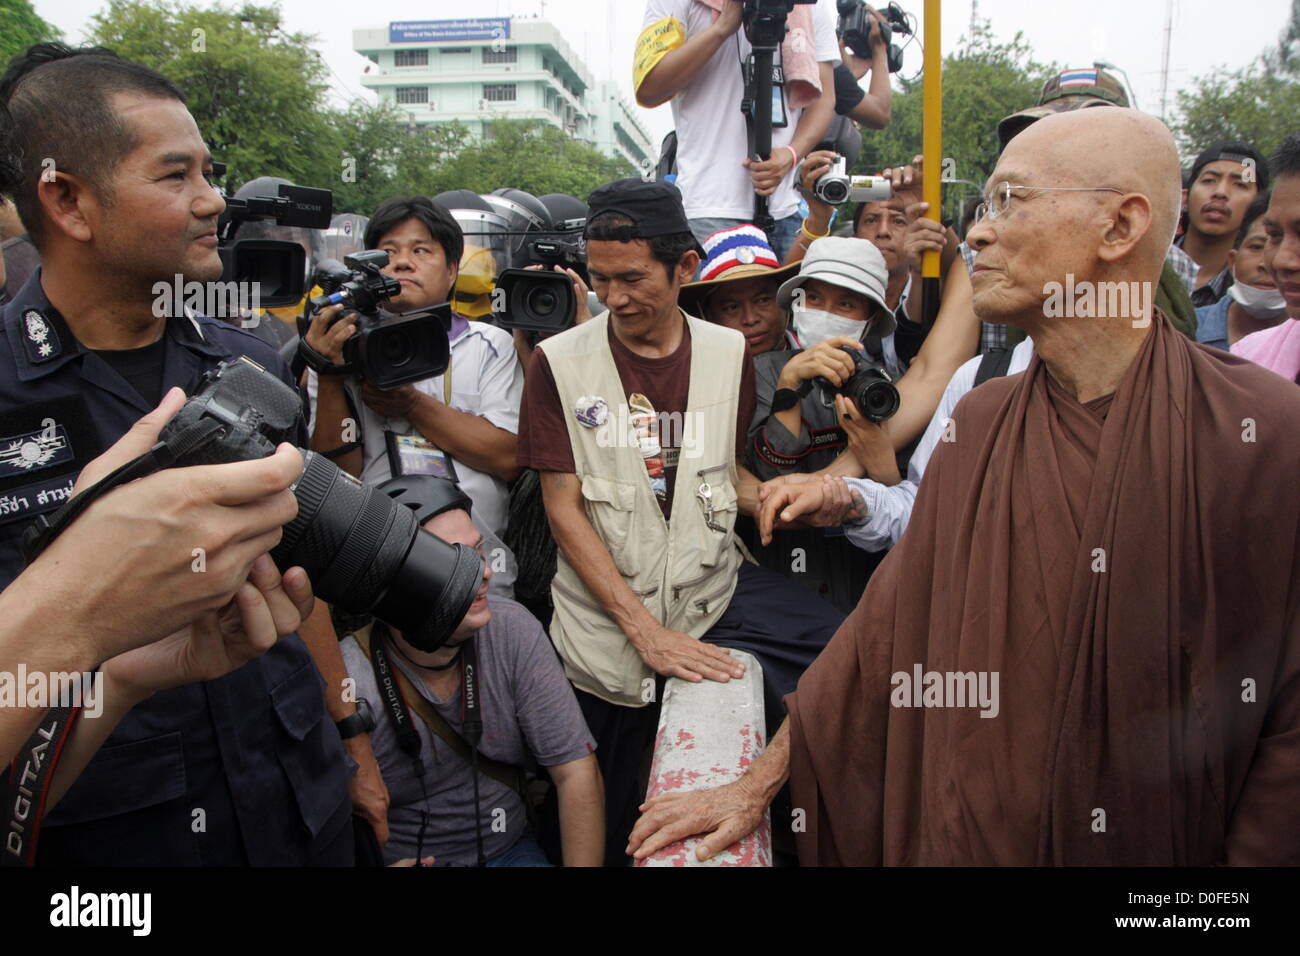 24 Nov 2012 , Bangkok , Thailand . Thai Buddhist monk speak with riot policemen . Thai police fired tear gas and detained dozens of people as tensions flared at an anti-Pitak Siam government protest .  The Siam Pitak group, which sponsored the protest, cited alleged government corruption and anti-monarchist elements within the ruling party as grounds for the protest. Police used tear gas and baton charges againt protesters. Stock Photo